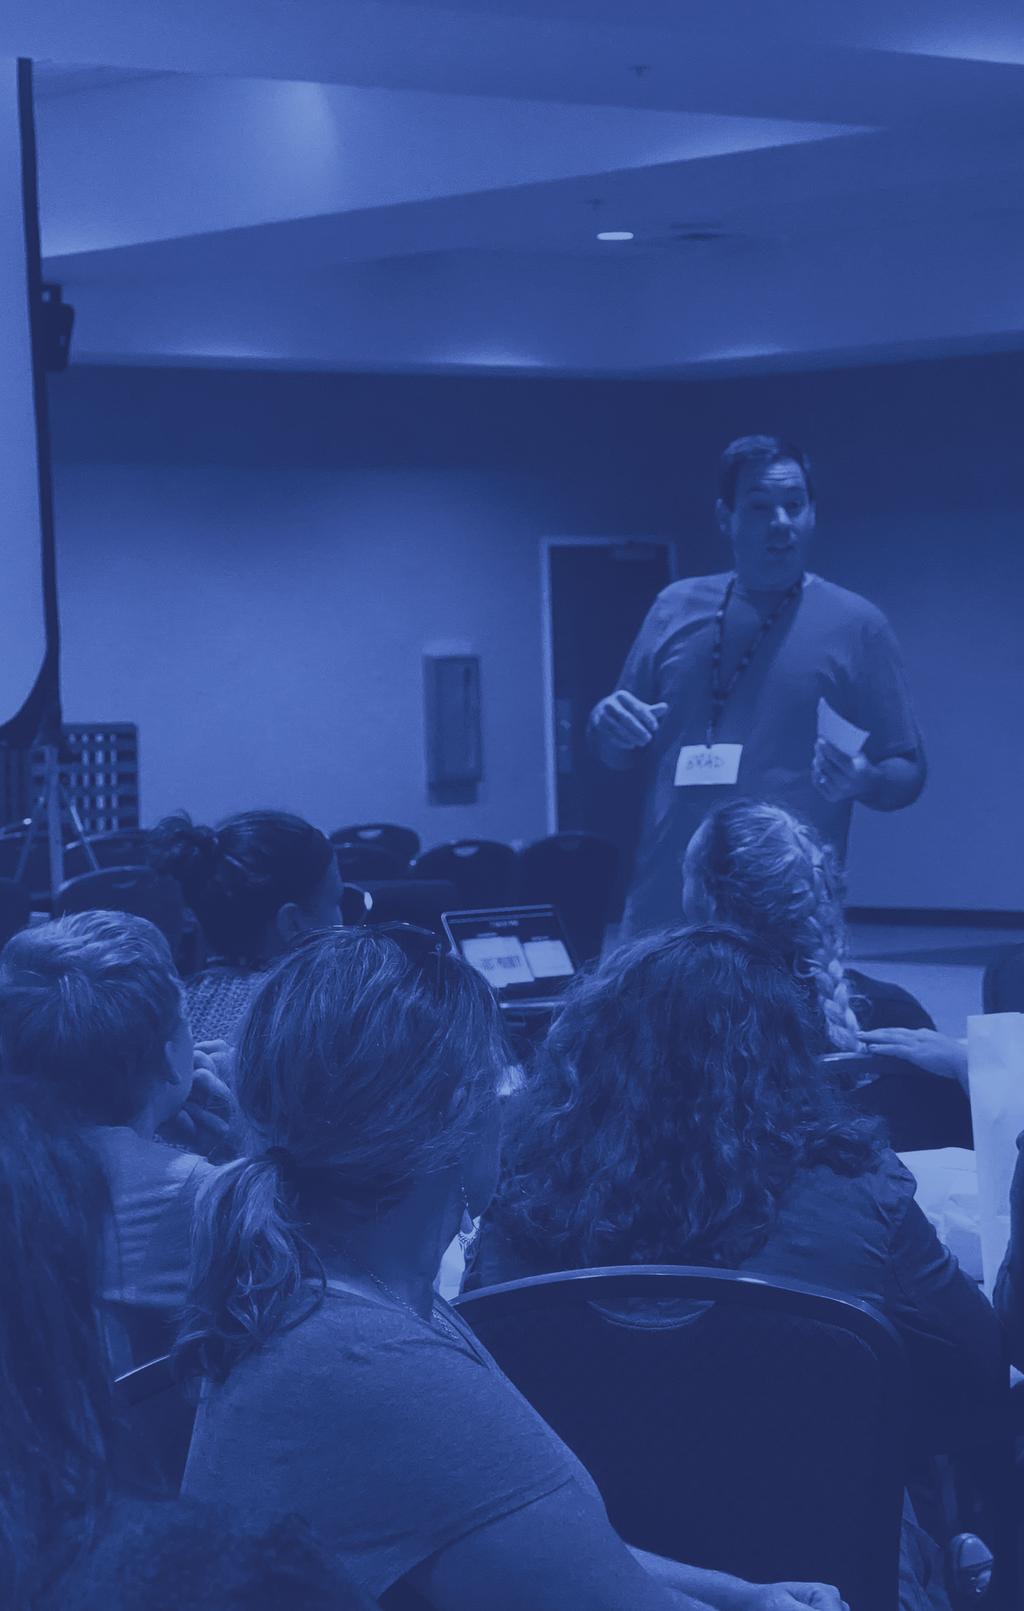 Why is training student leaders to share the HOPE of Christ so important?